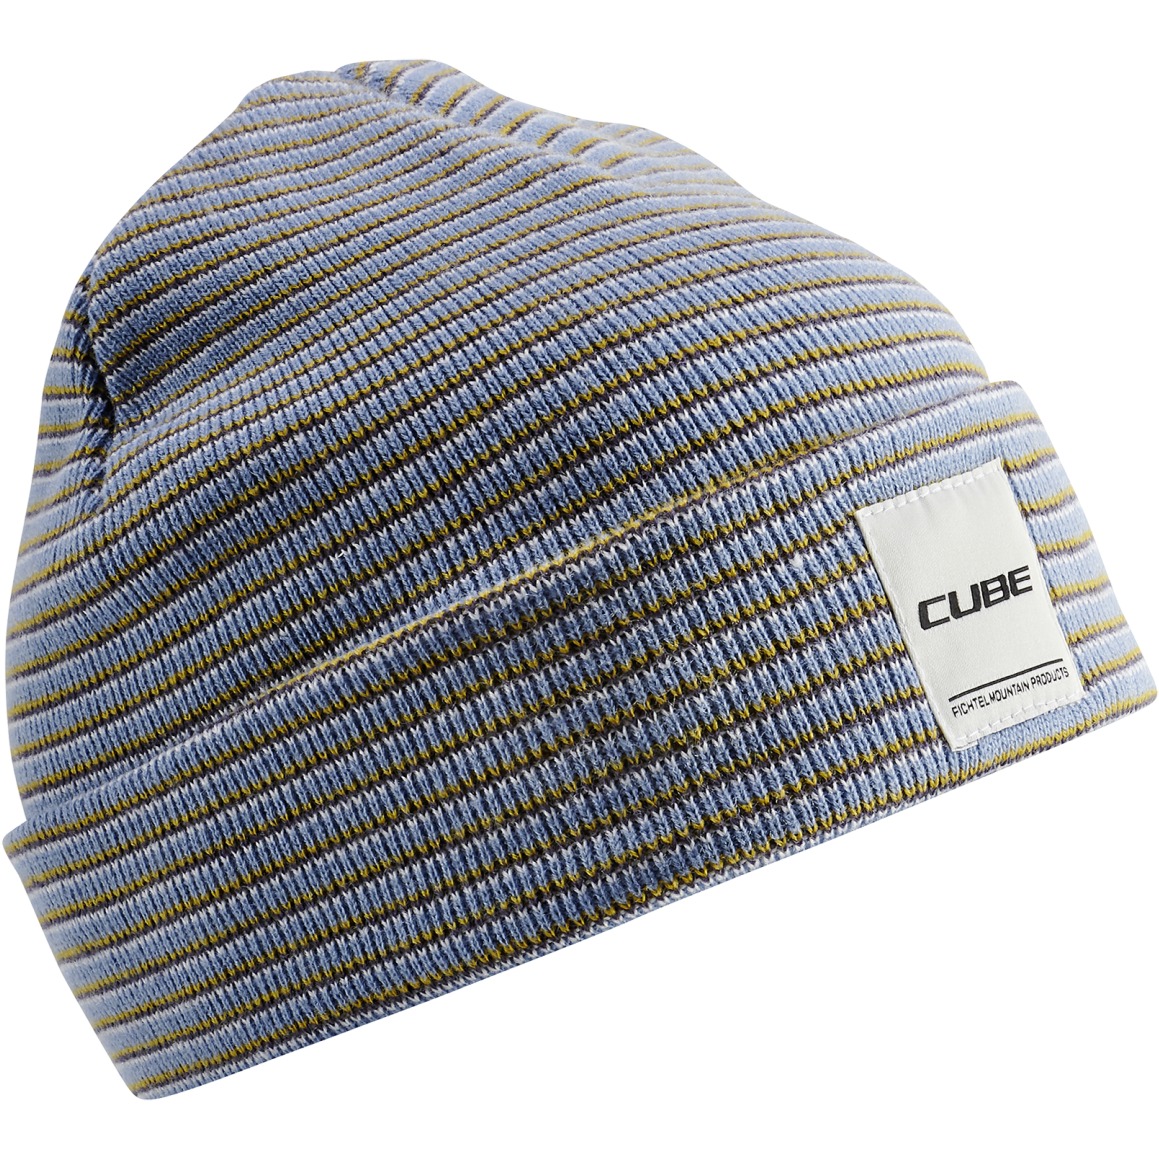 Picture of CUBE Beanie - blue